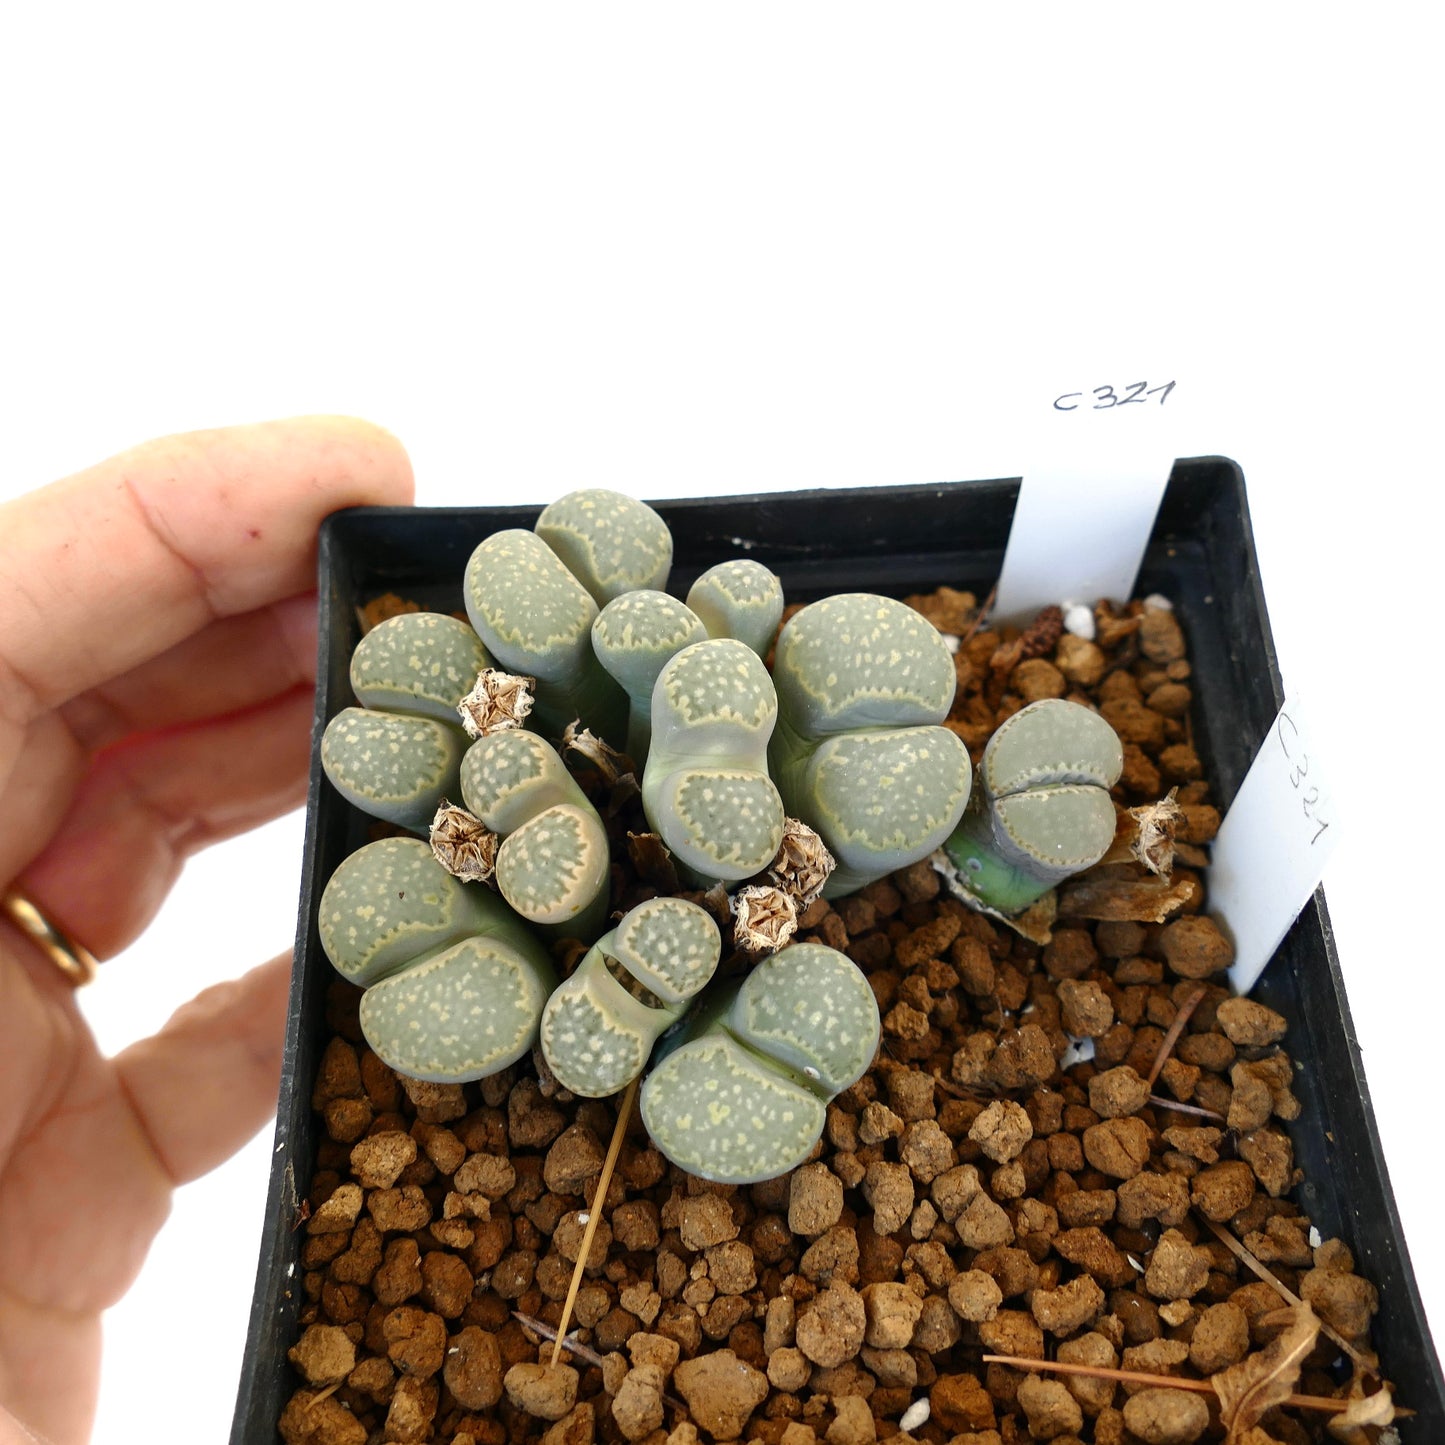 Lithops salicola C321 (25 km WNW of Petrusville, South Africa)